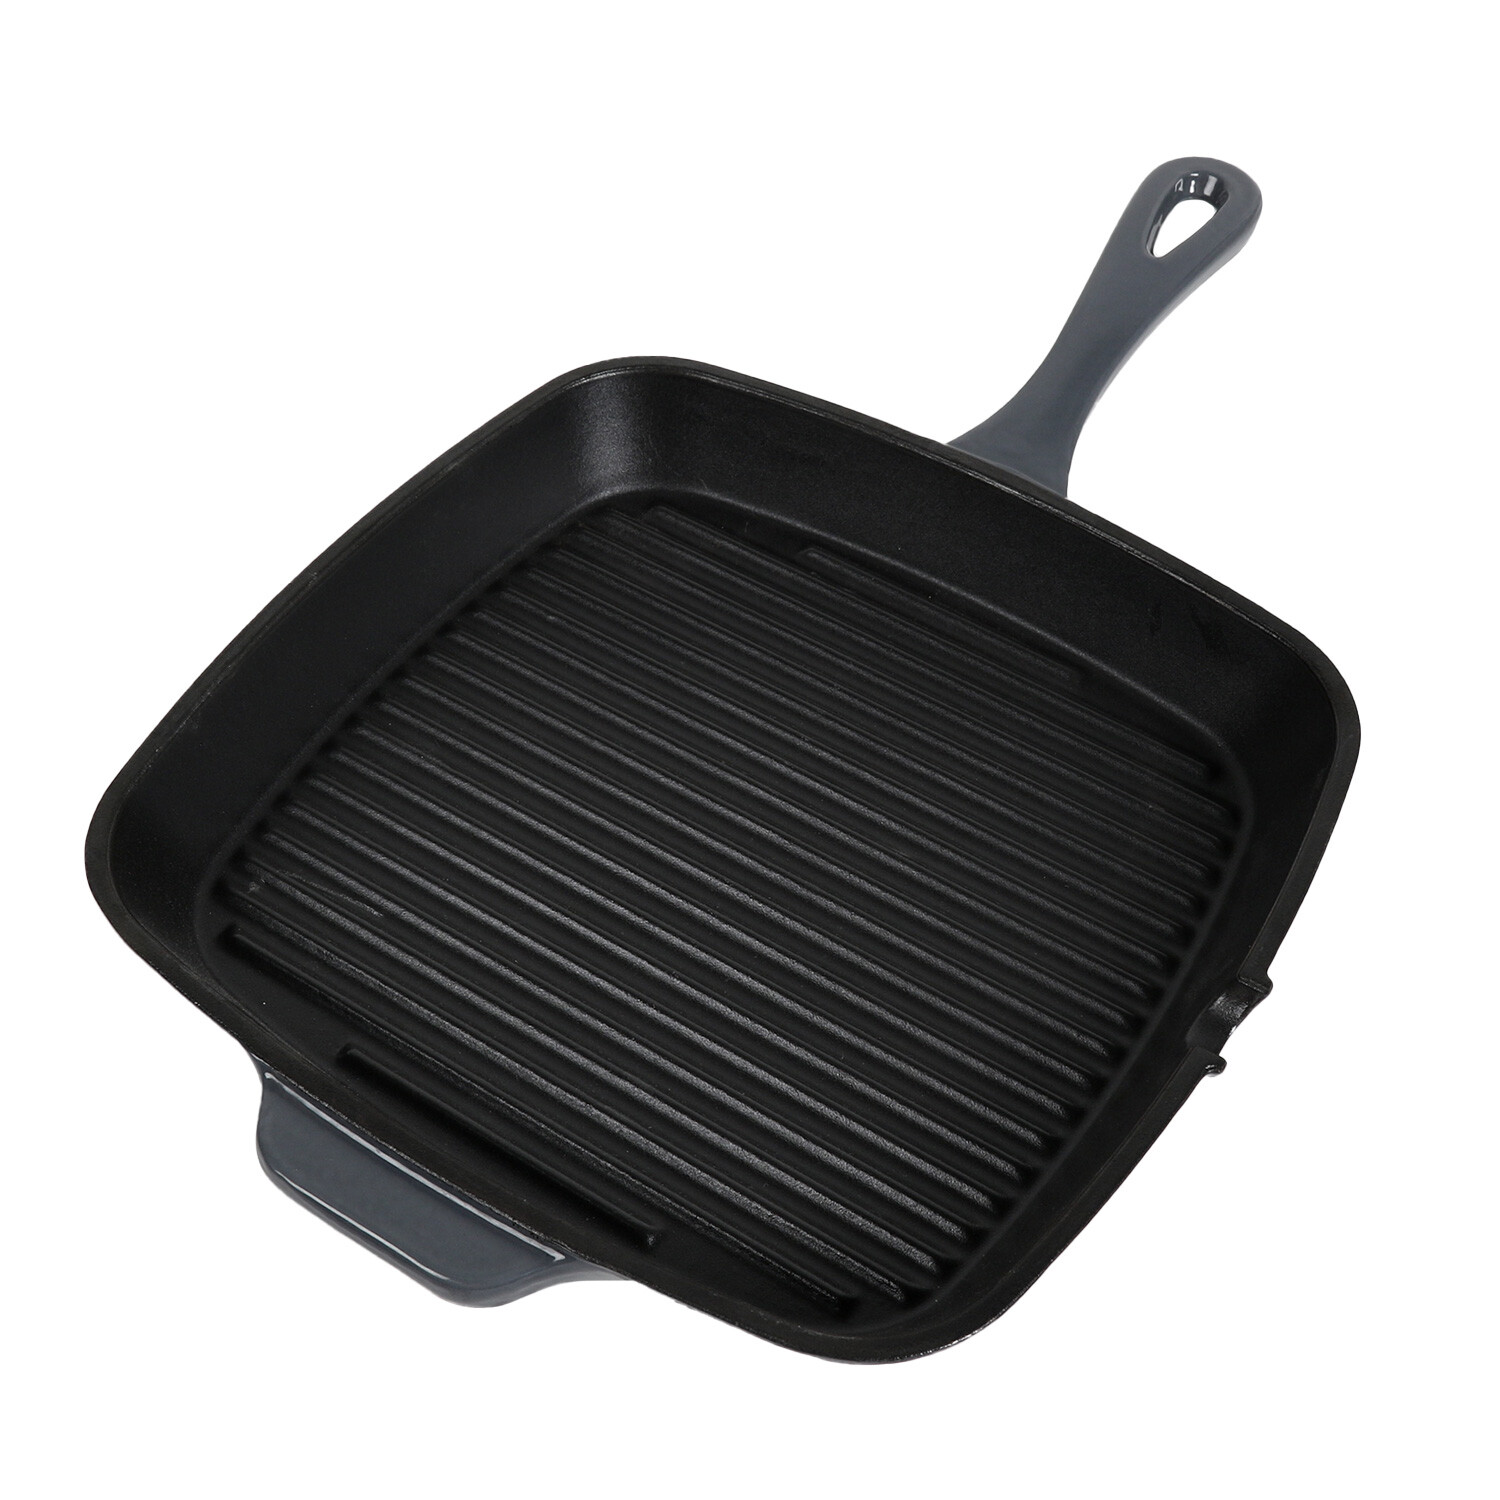 Square Grill Pan with Helper Handle - Black Image 1